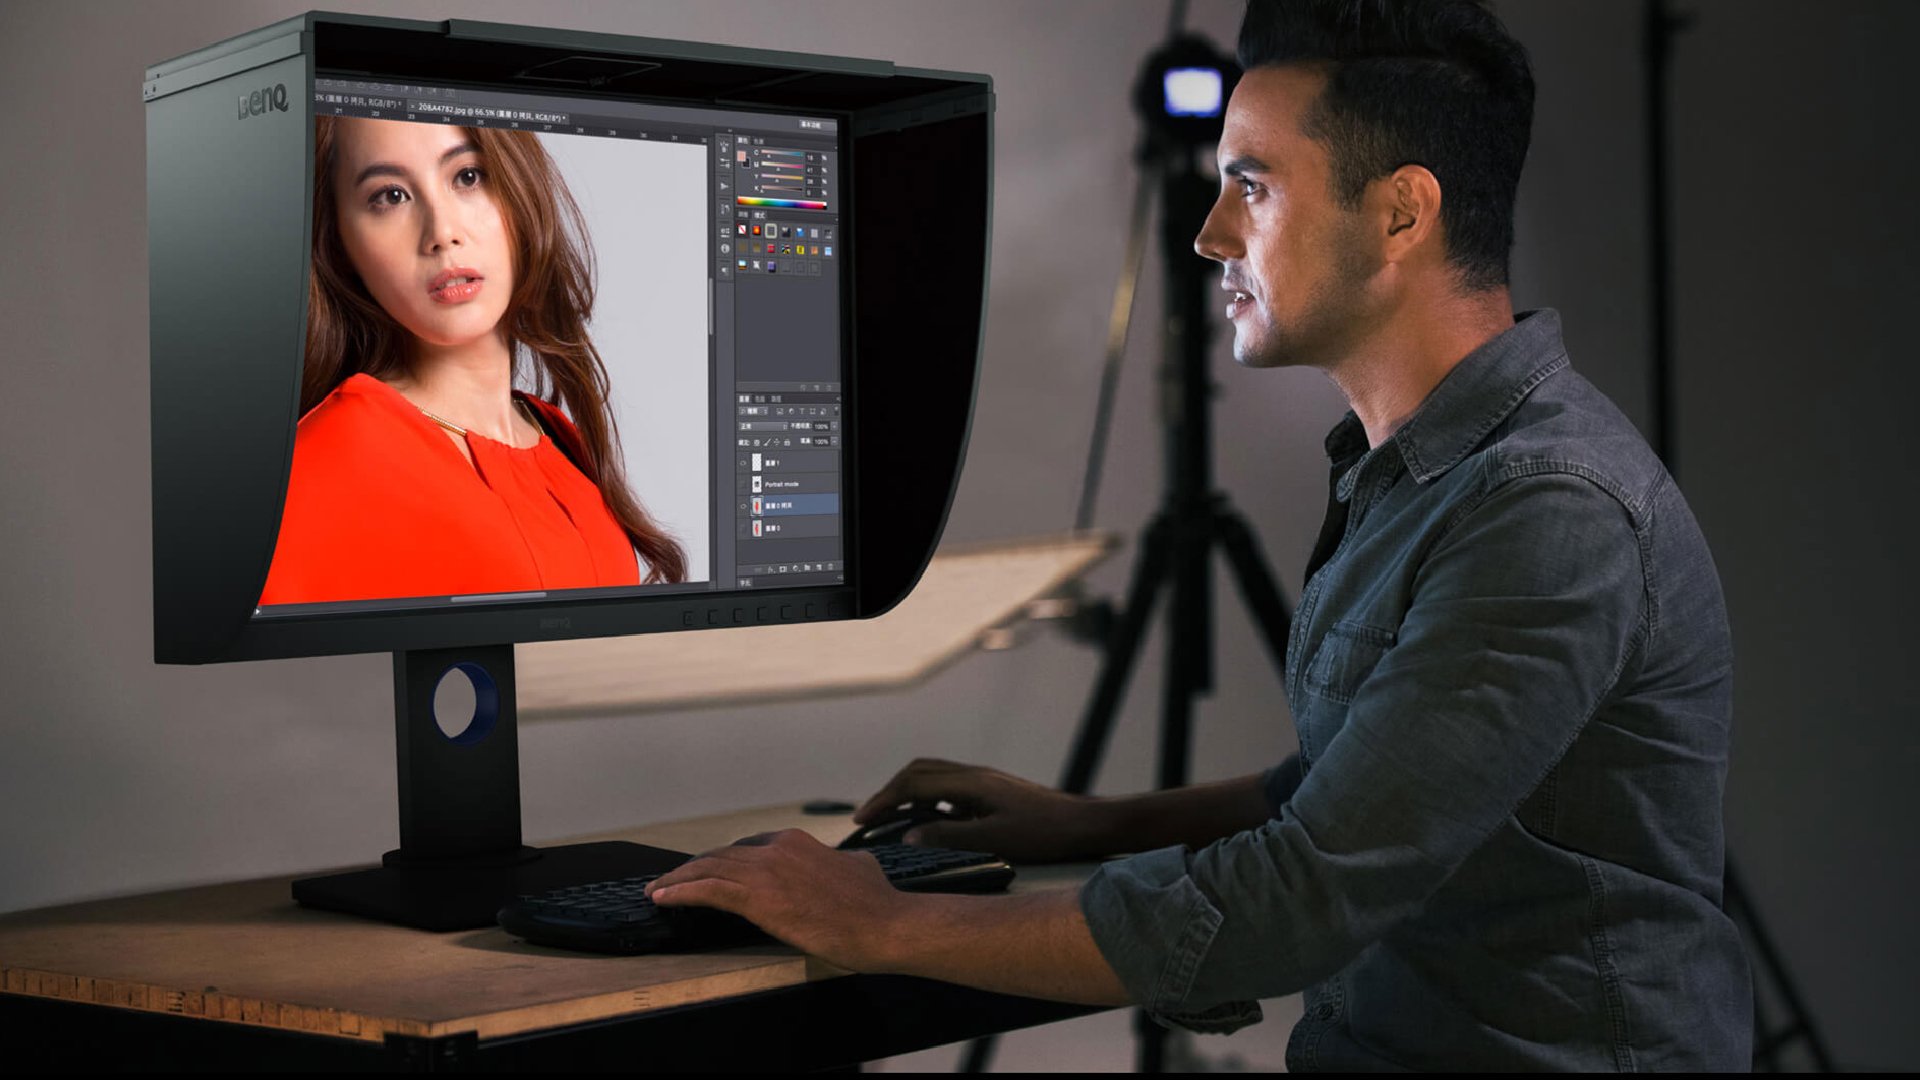 By using BenQ SH240 shading hood, the color accuracy of photographers' photos can be assured. The SH240 shading hood can be used in both portrait and landscape orientations.